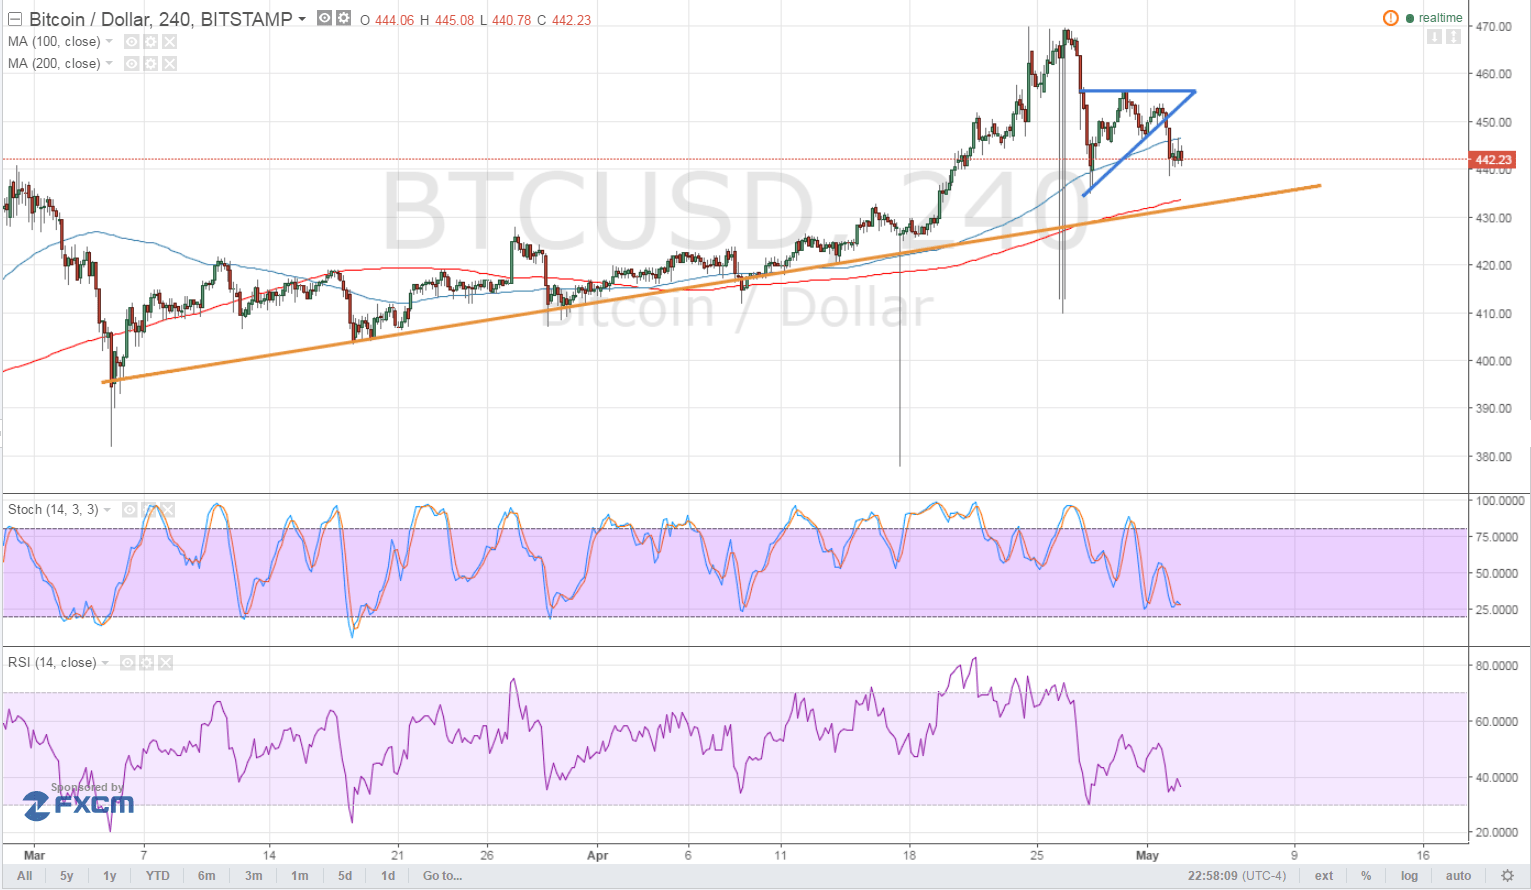 Bitcoin Price Technical Analysis for 05/03/2016 - How Low Can Bears Go?